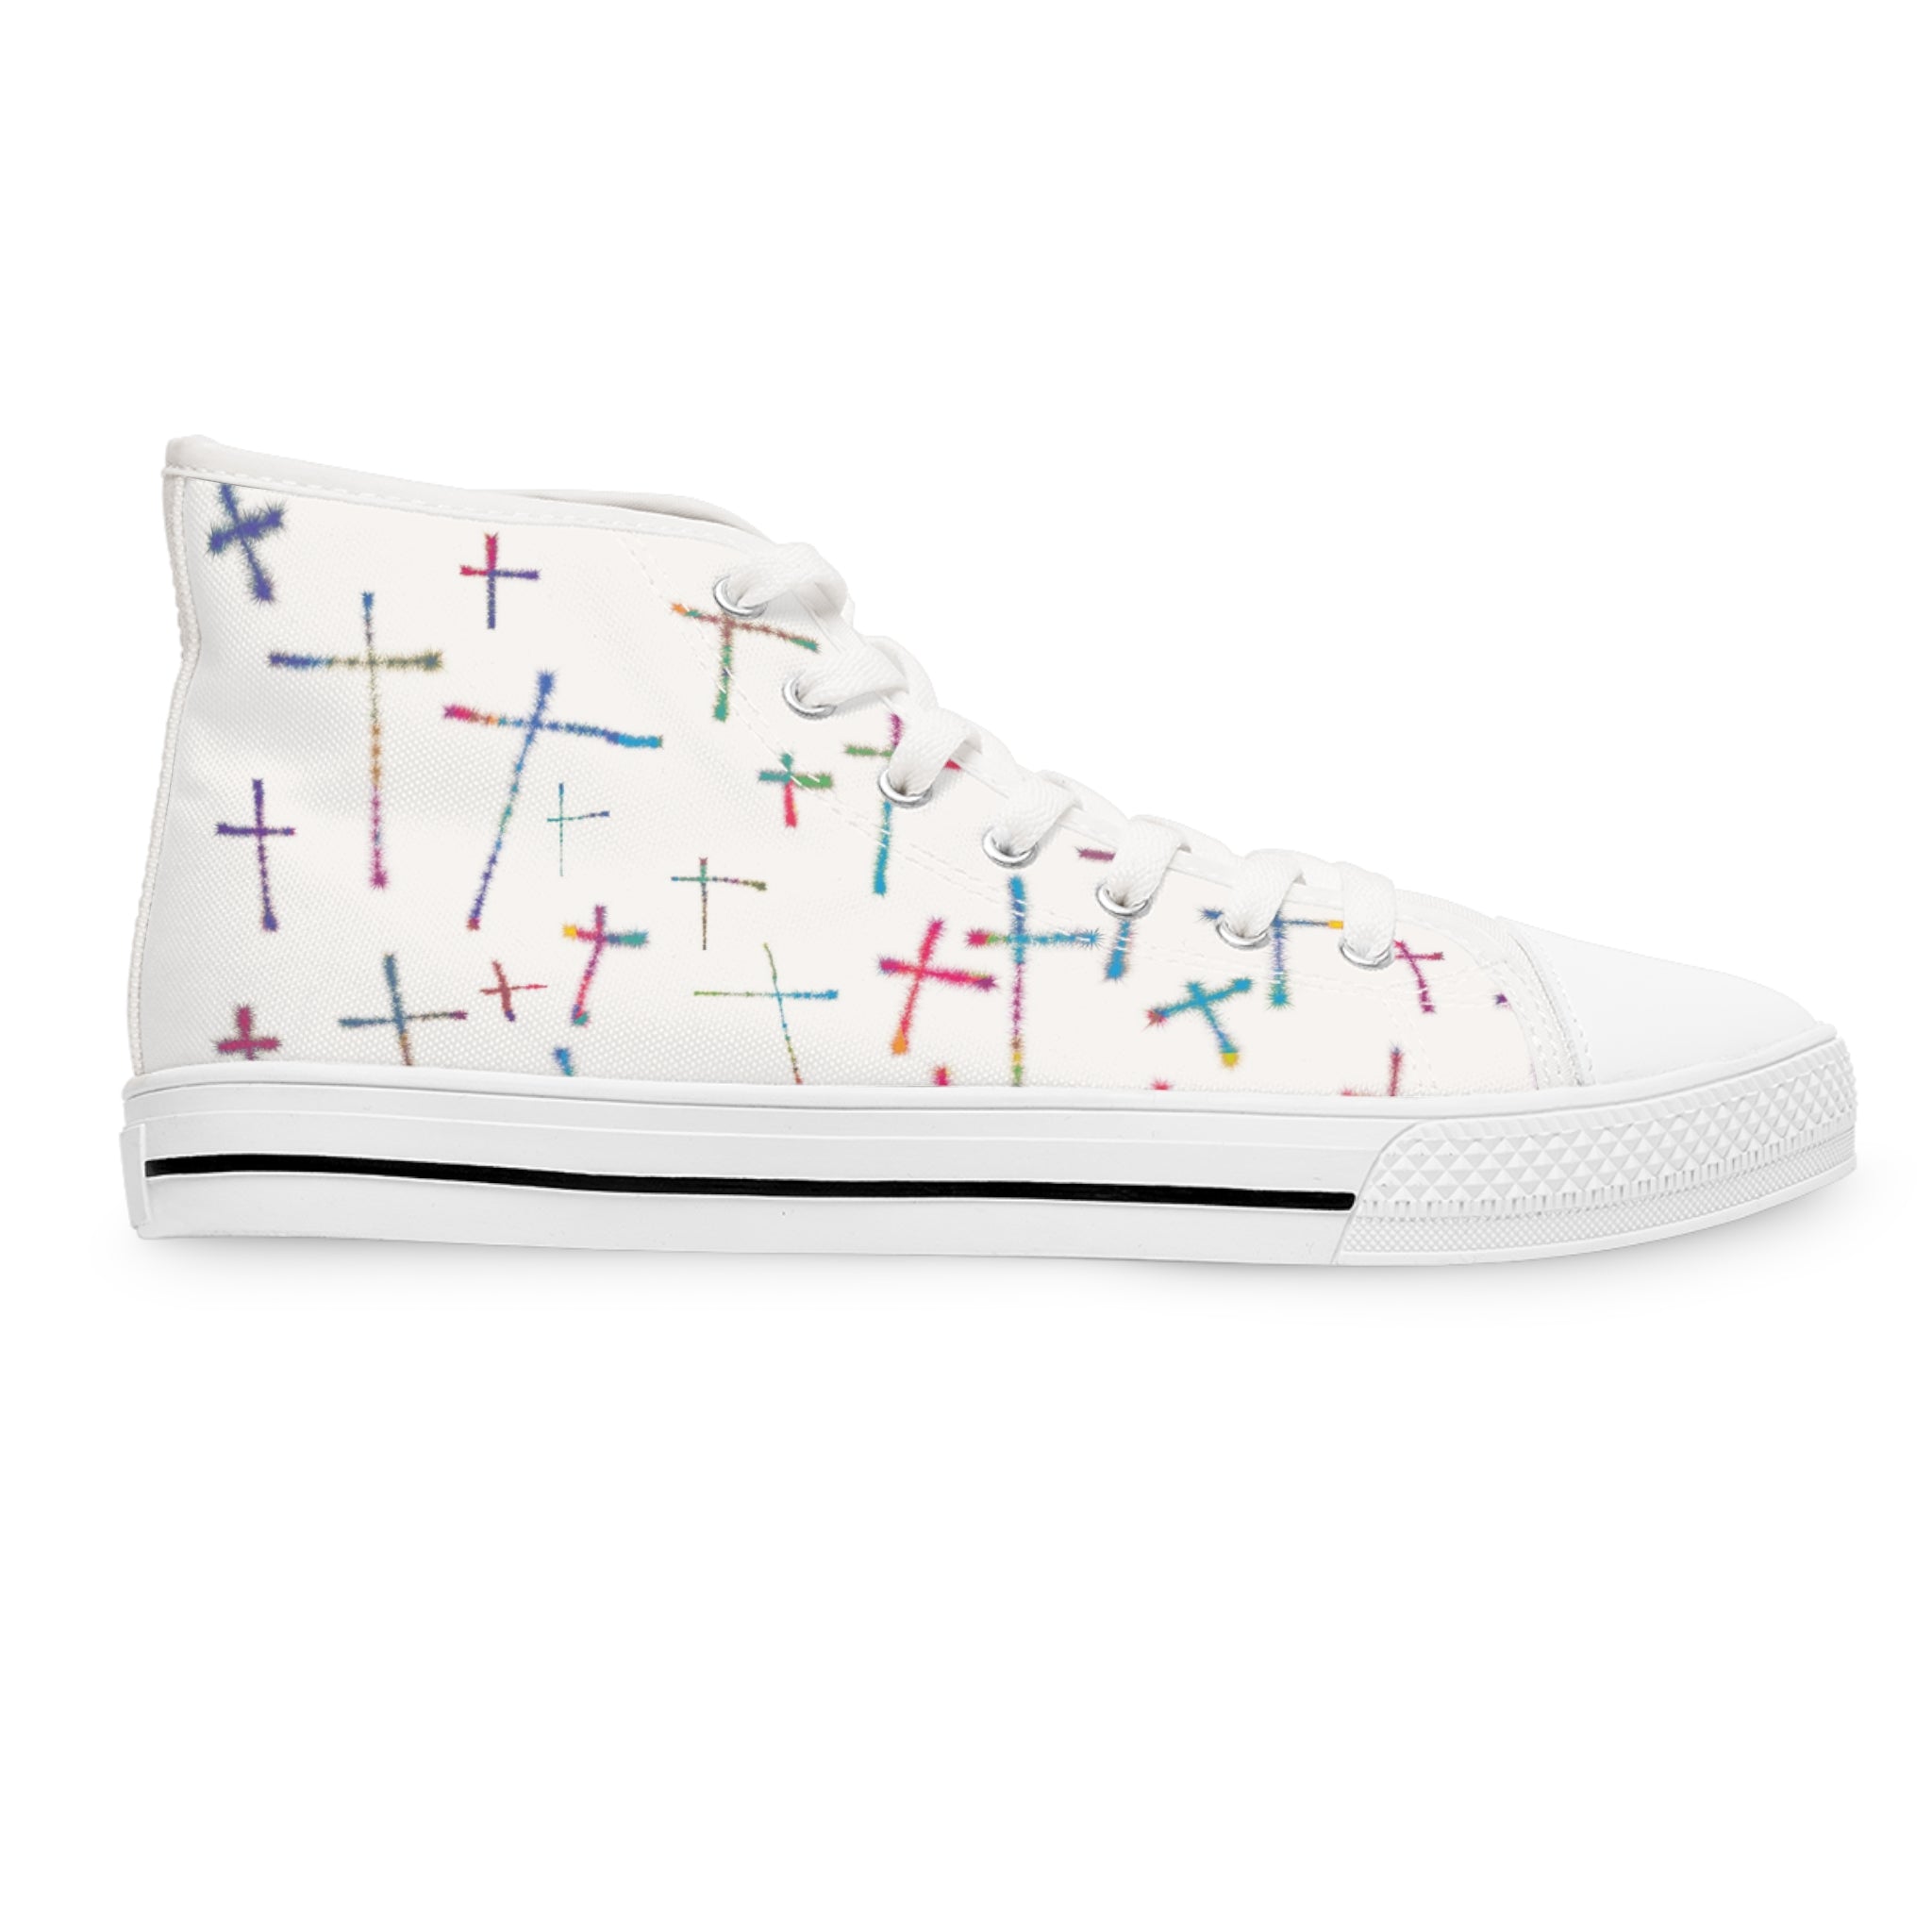 Colorful Crosses Women's High Top Sneakers Size: US 5.5 Color: White sole Jesus Passion Apparel